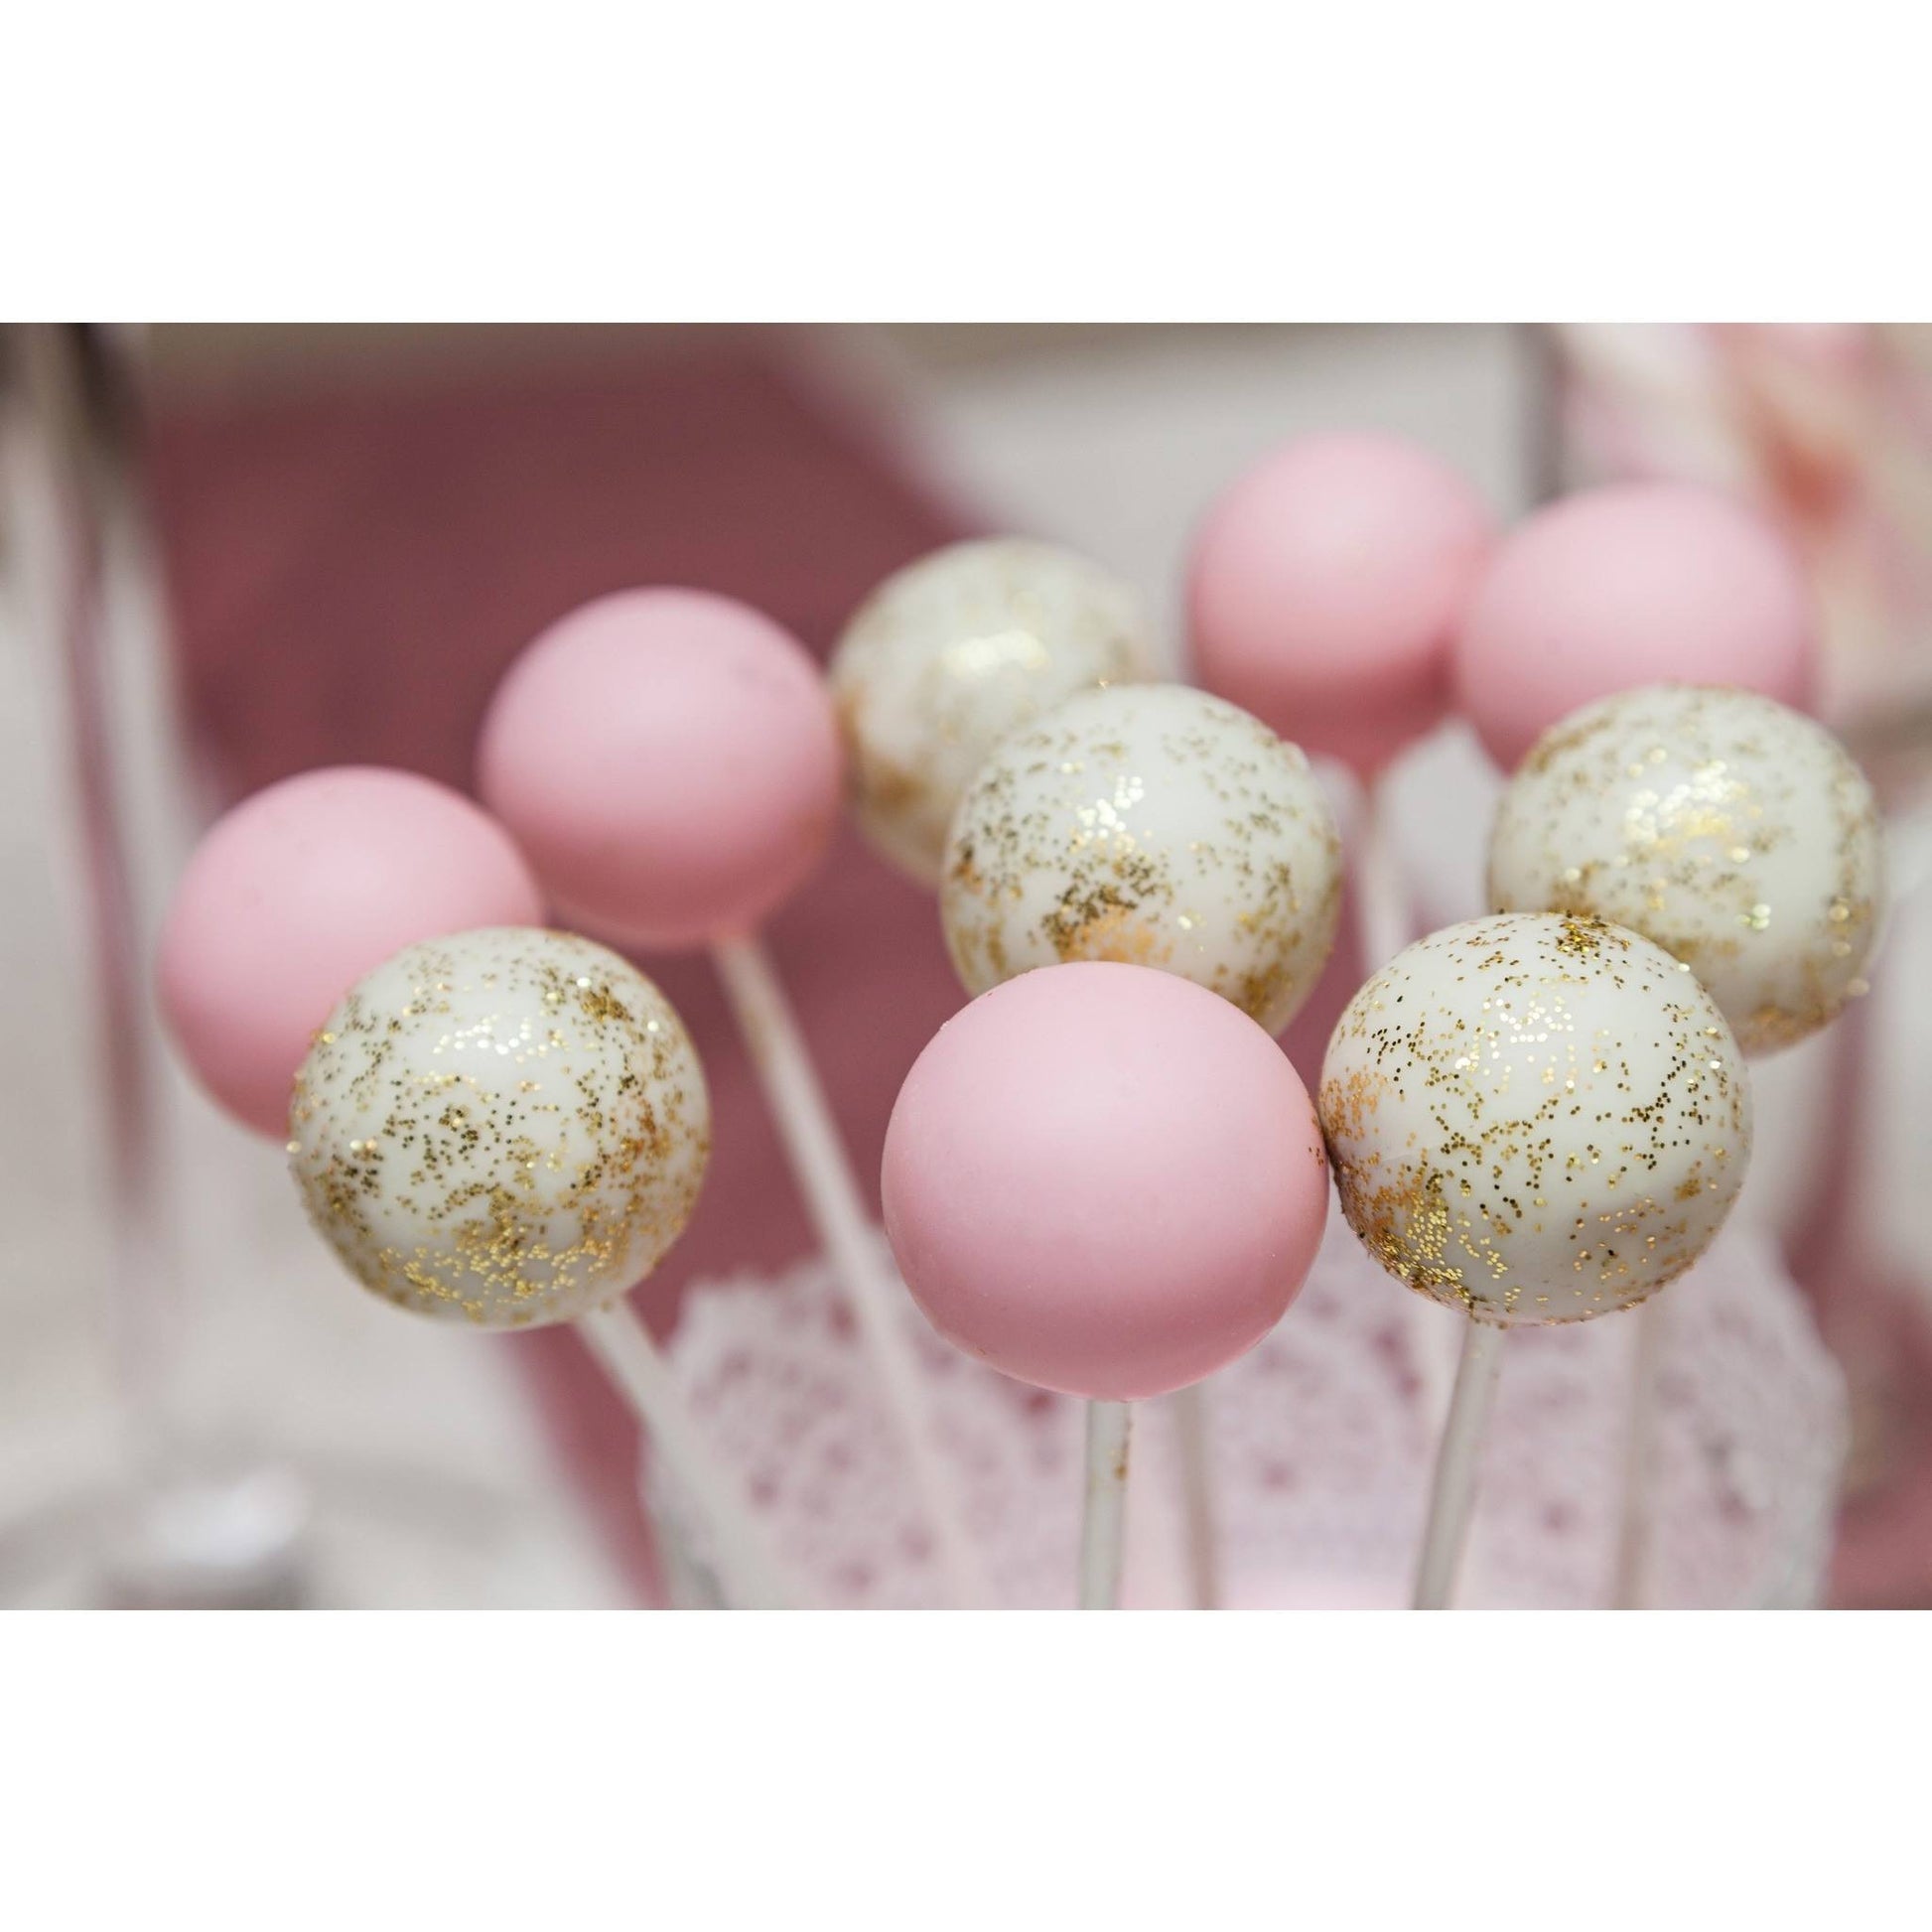 Pink and Glitter Cake Pops - Cake Pops Parties